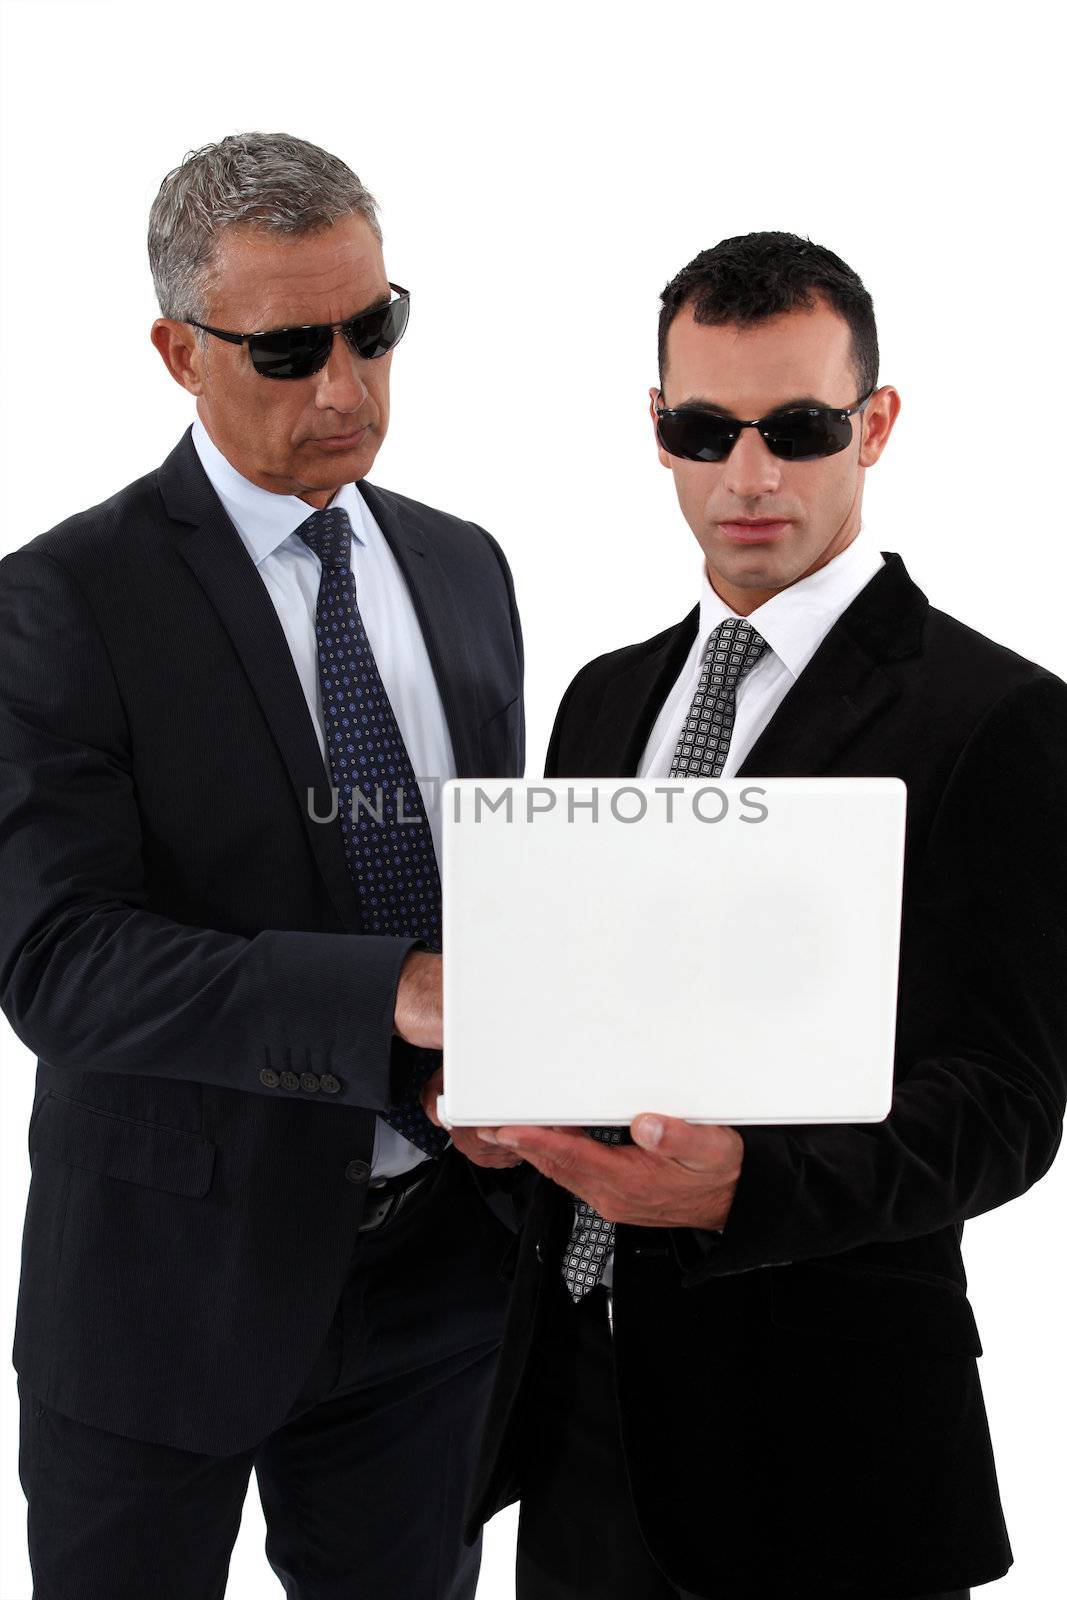 Businessmen wearing sunglasses and looking at a laptop